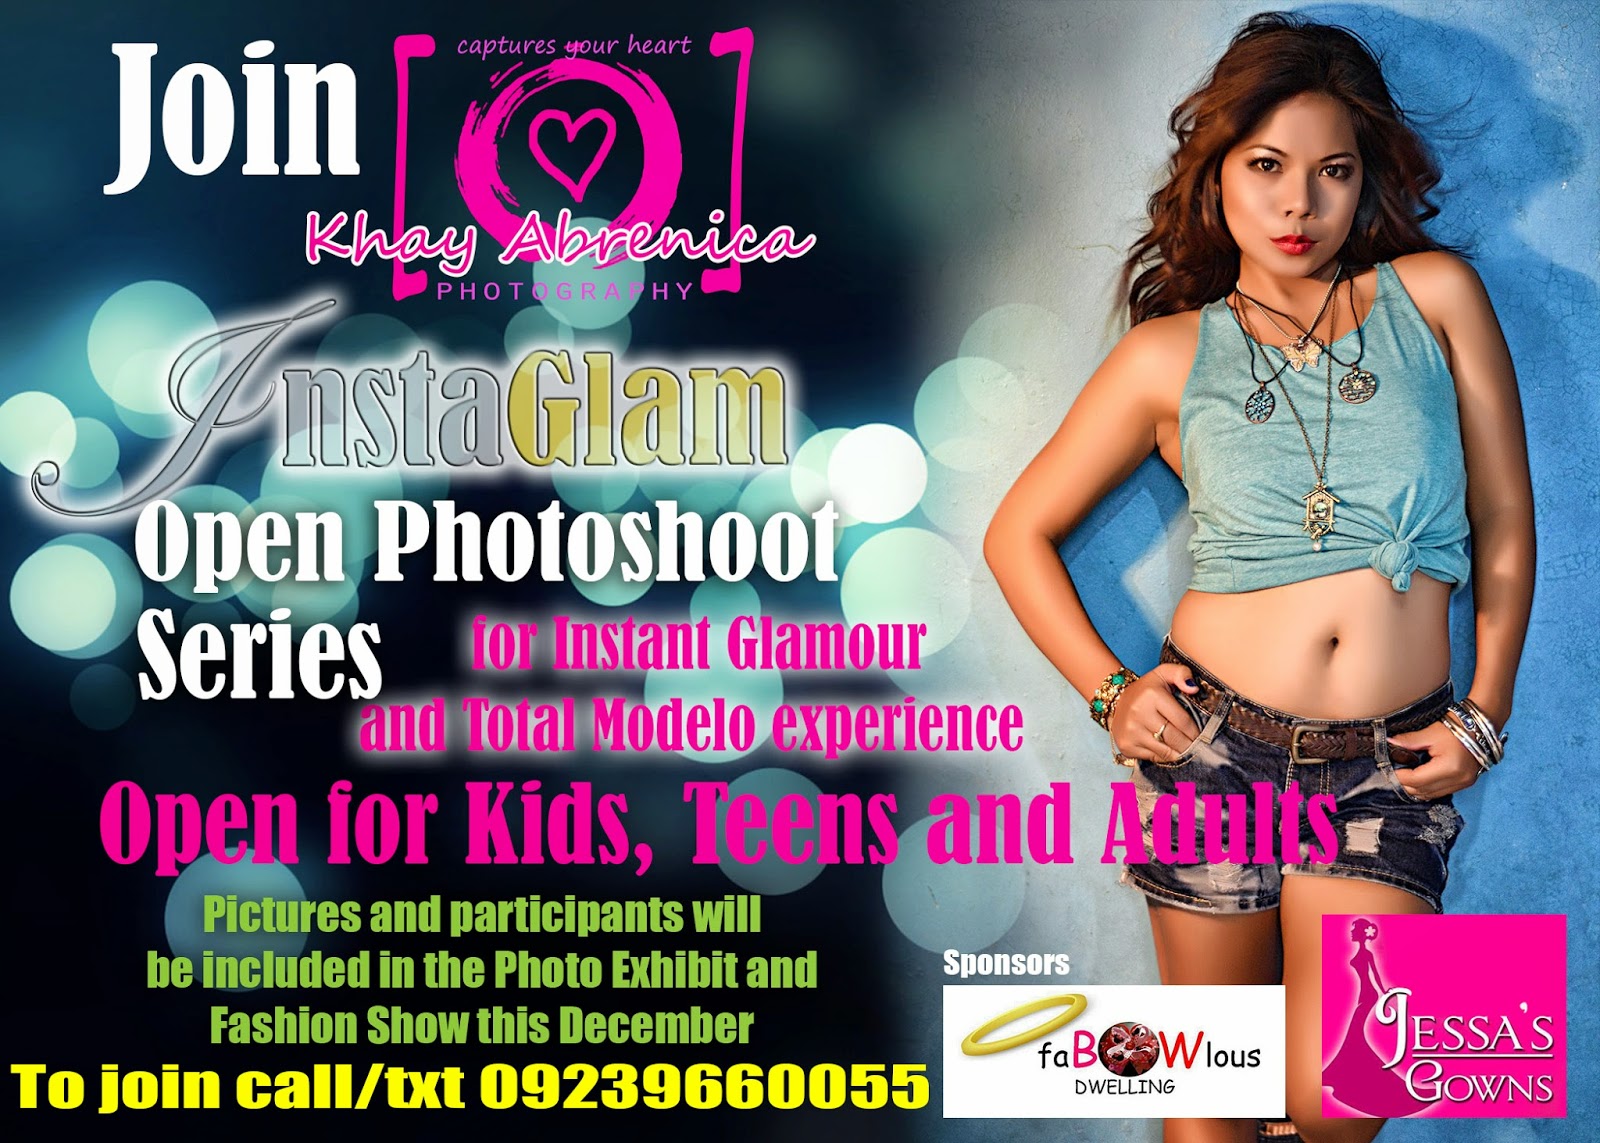 https://www.facebook.com/khay.abrenica.photography/photos/a.428024687239281.86080.295800427128375/778771298831283/?type=1&theater